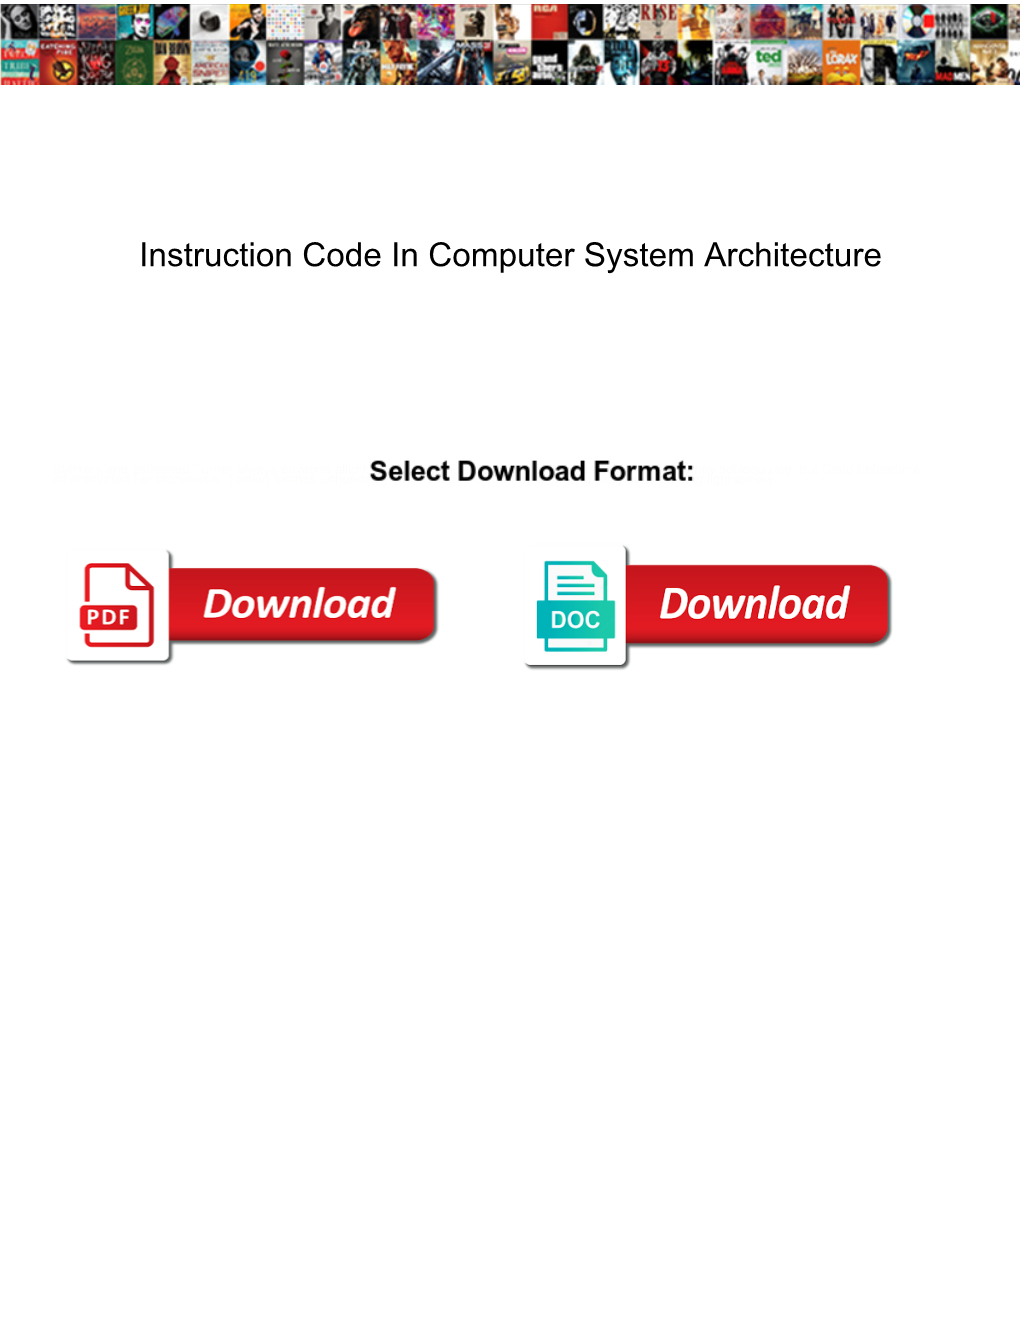 Instruction Code in Computer System Architecture